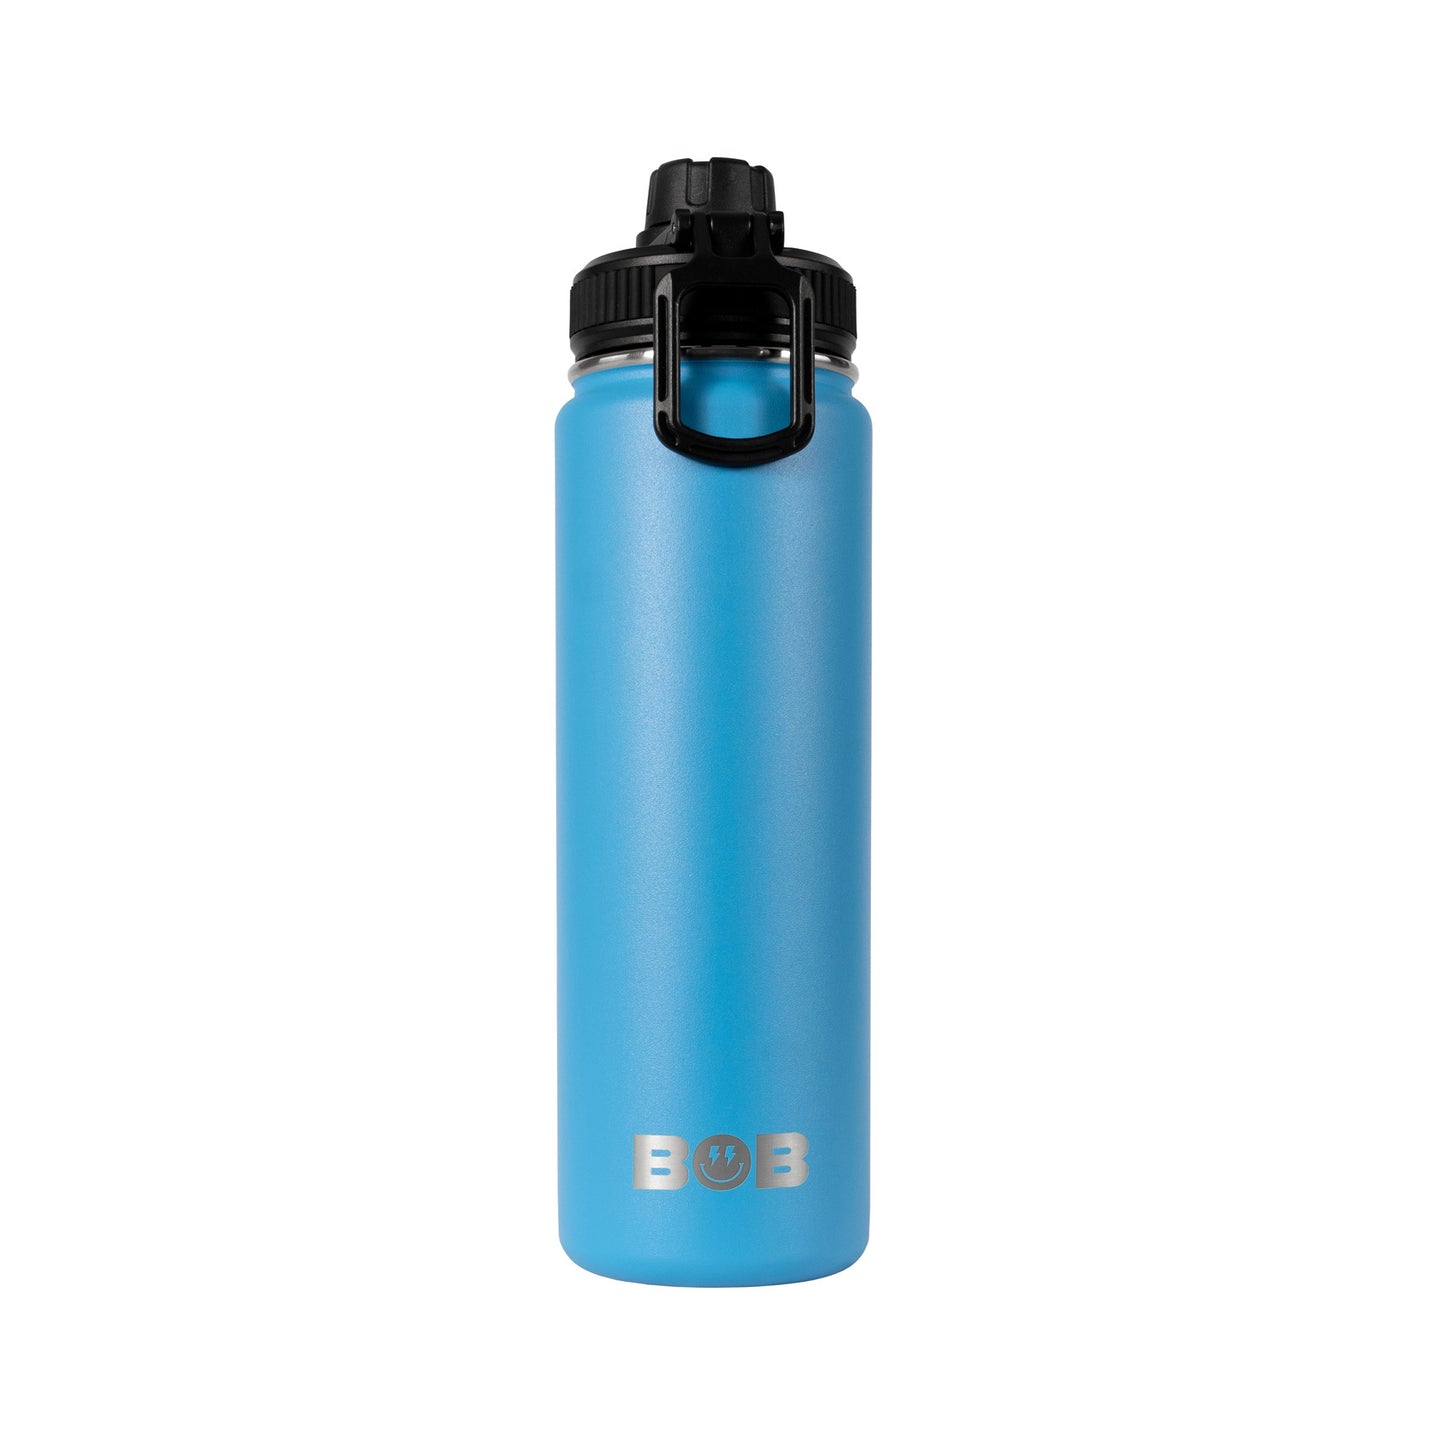 BOBs 26Oz Double Wall Vacuum Insulated Water Bottle with Spout Lid by BOB The Cooler Co